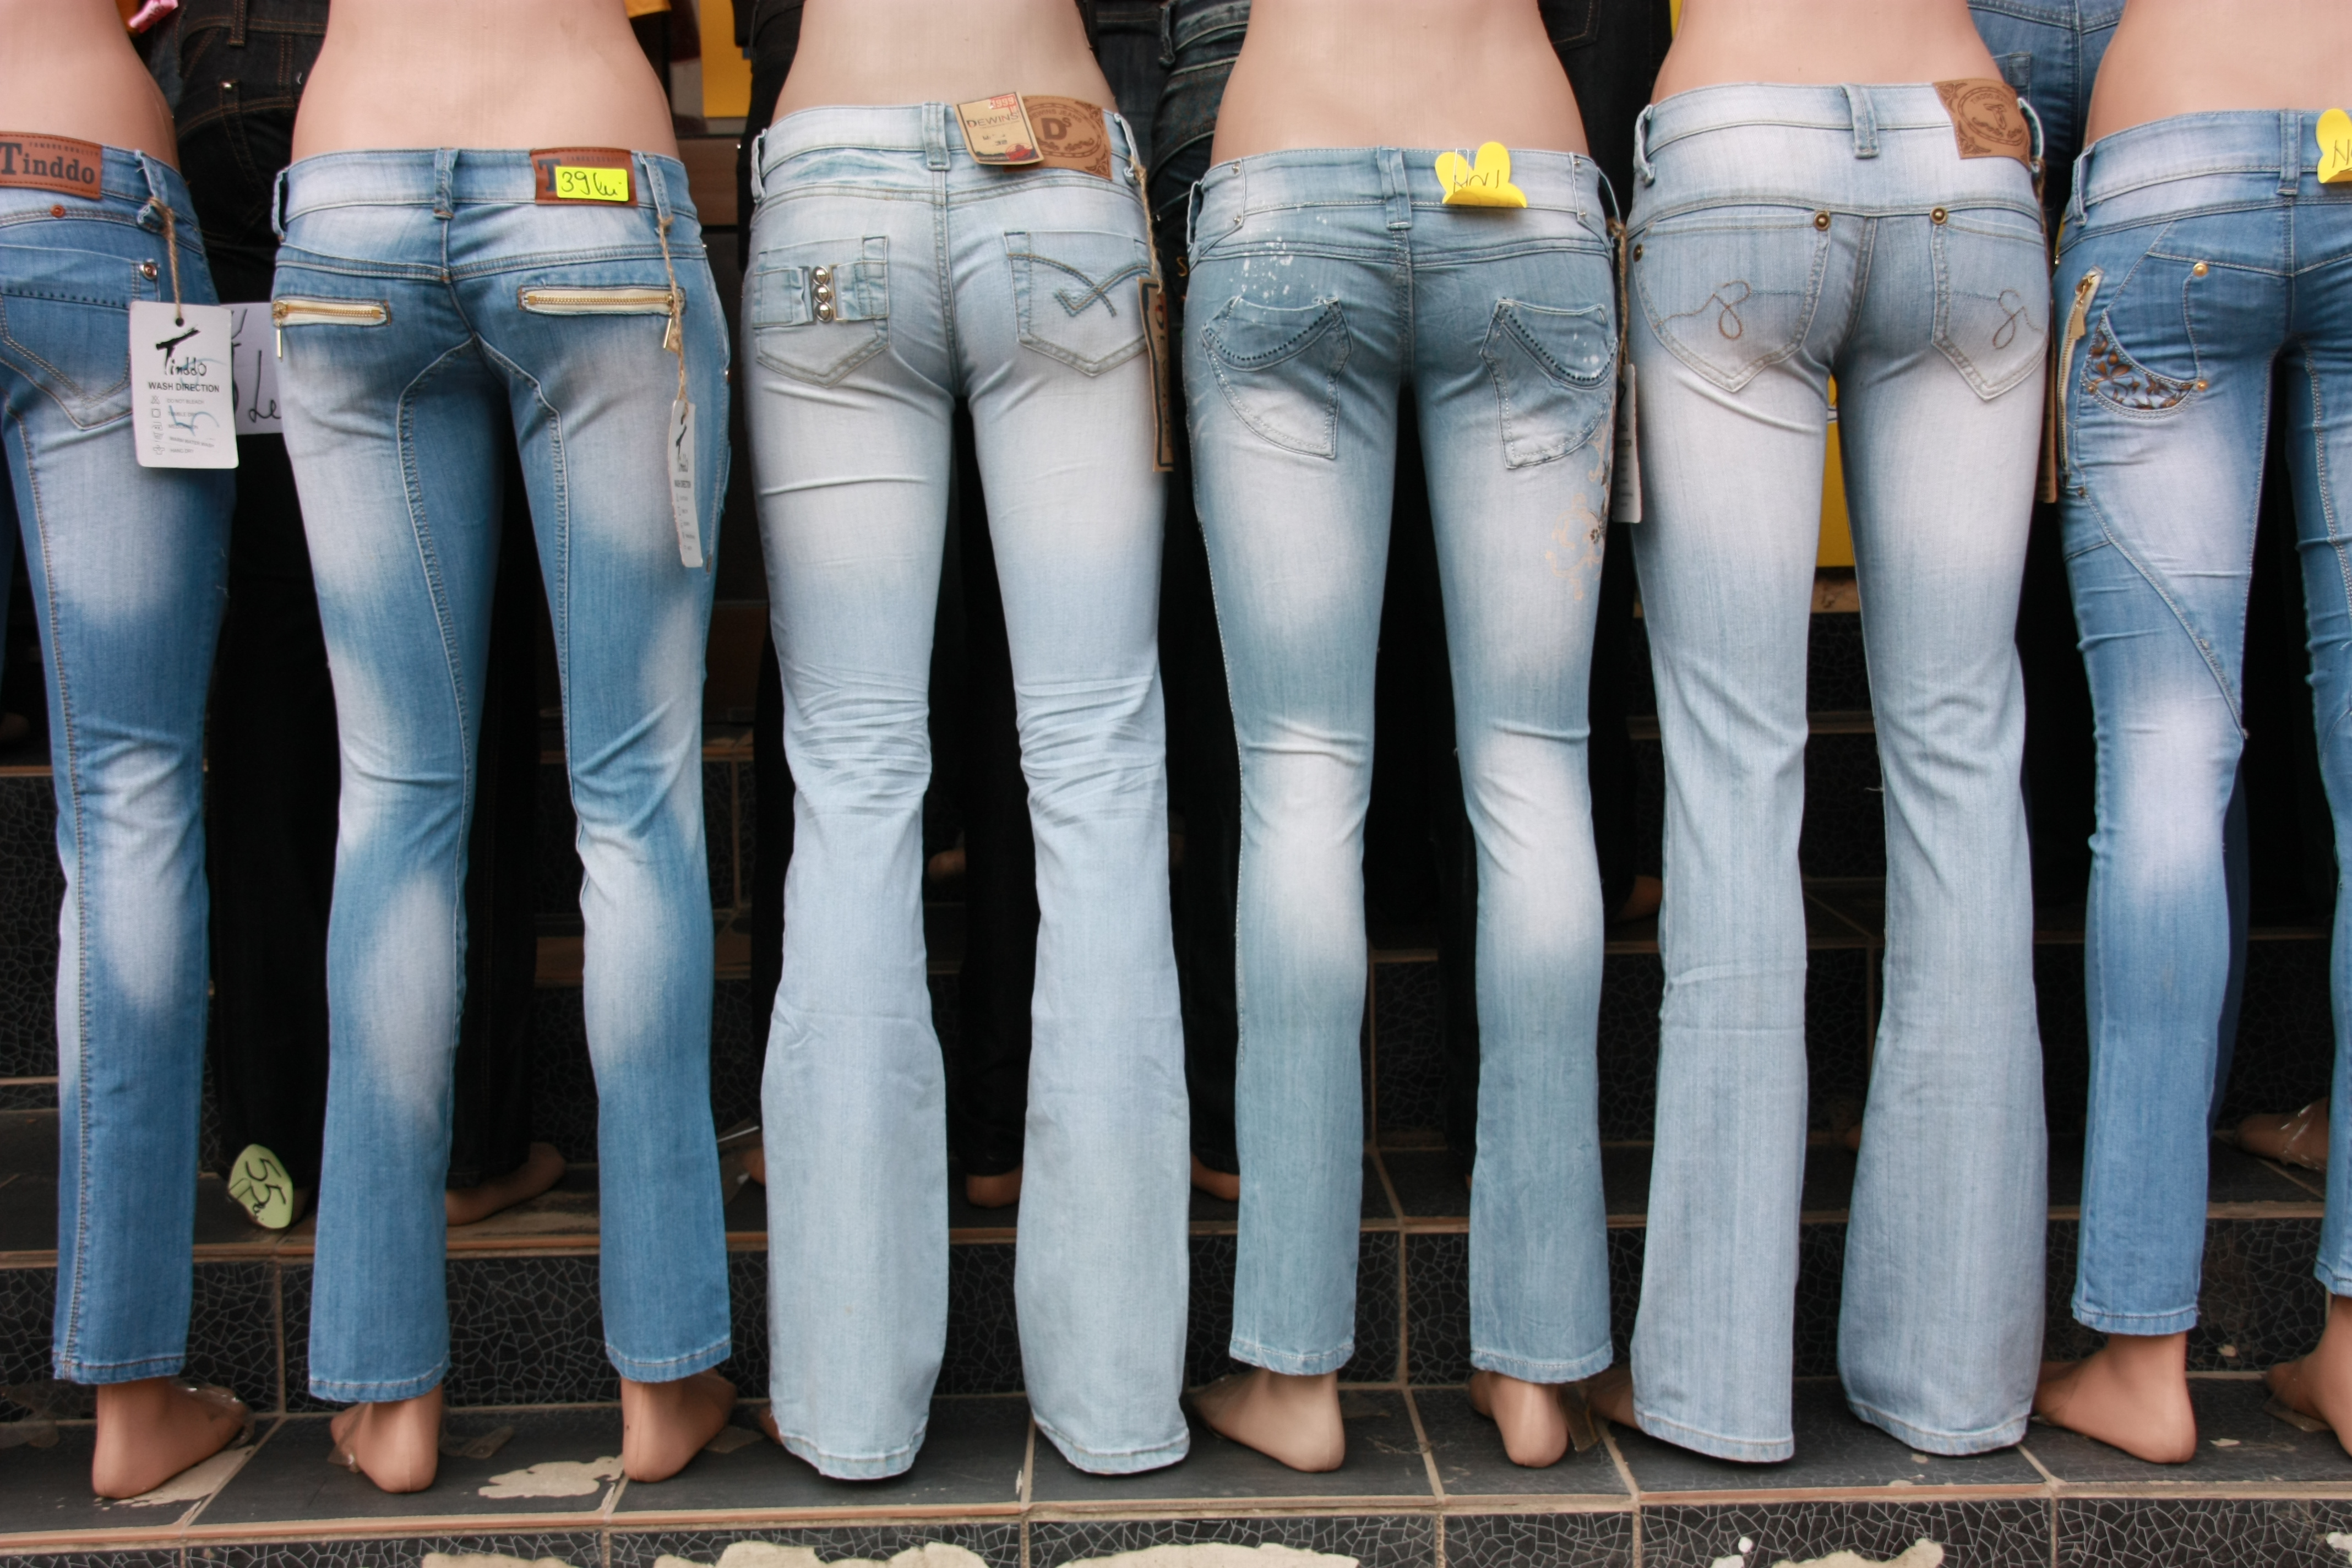 File:Mannequin with jeans.jpg - Wikimedia Commons